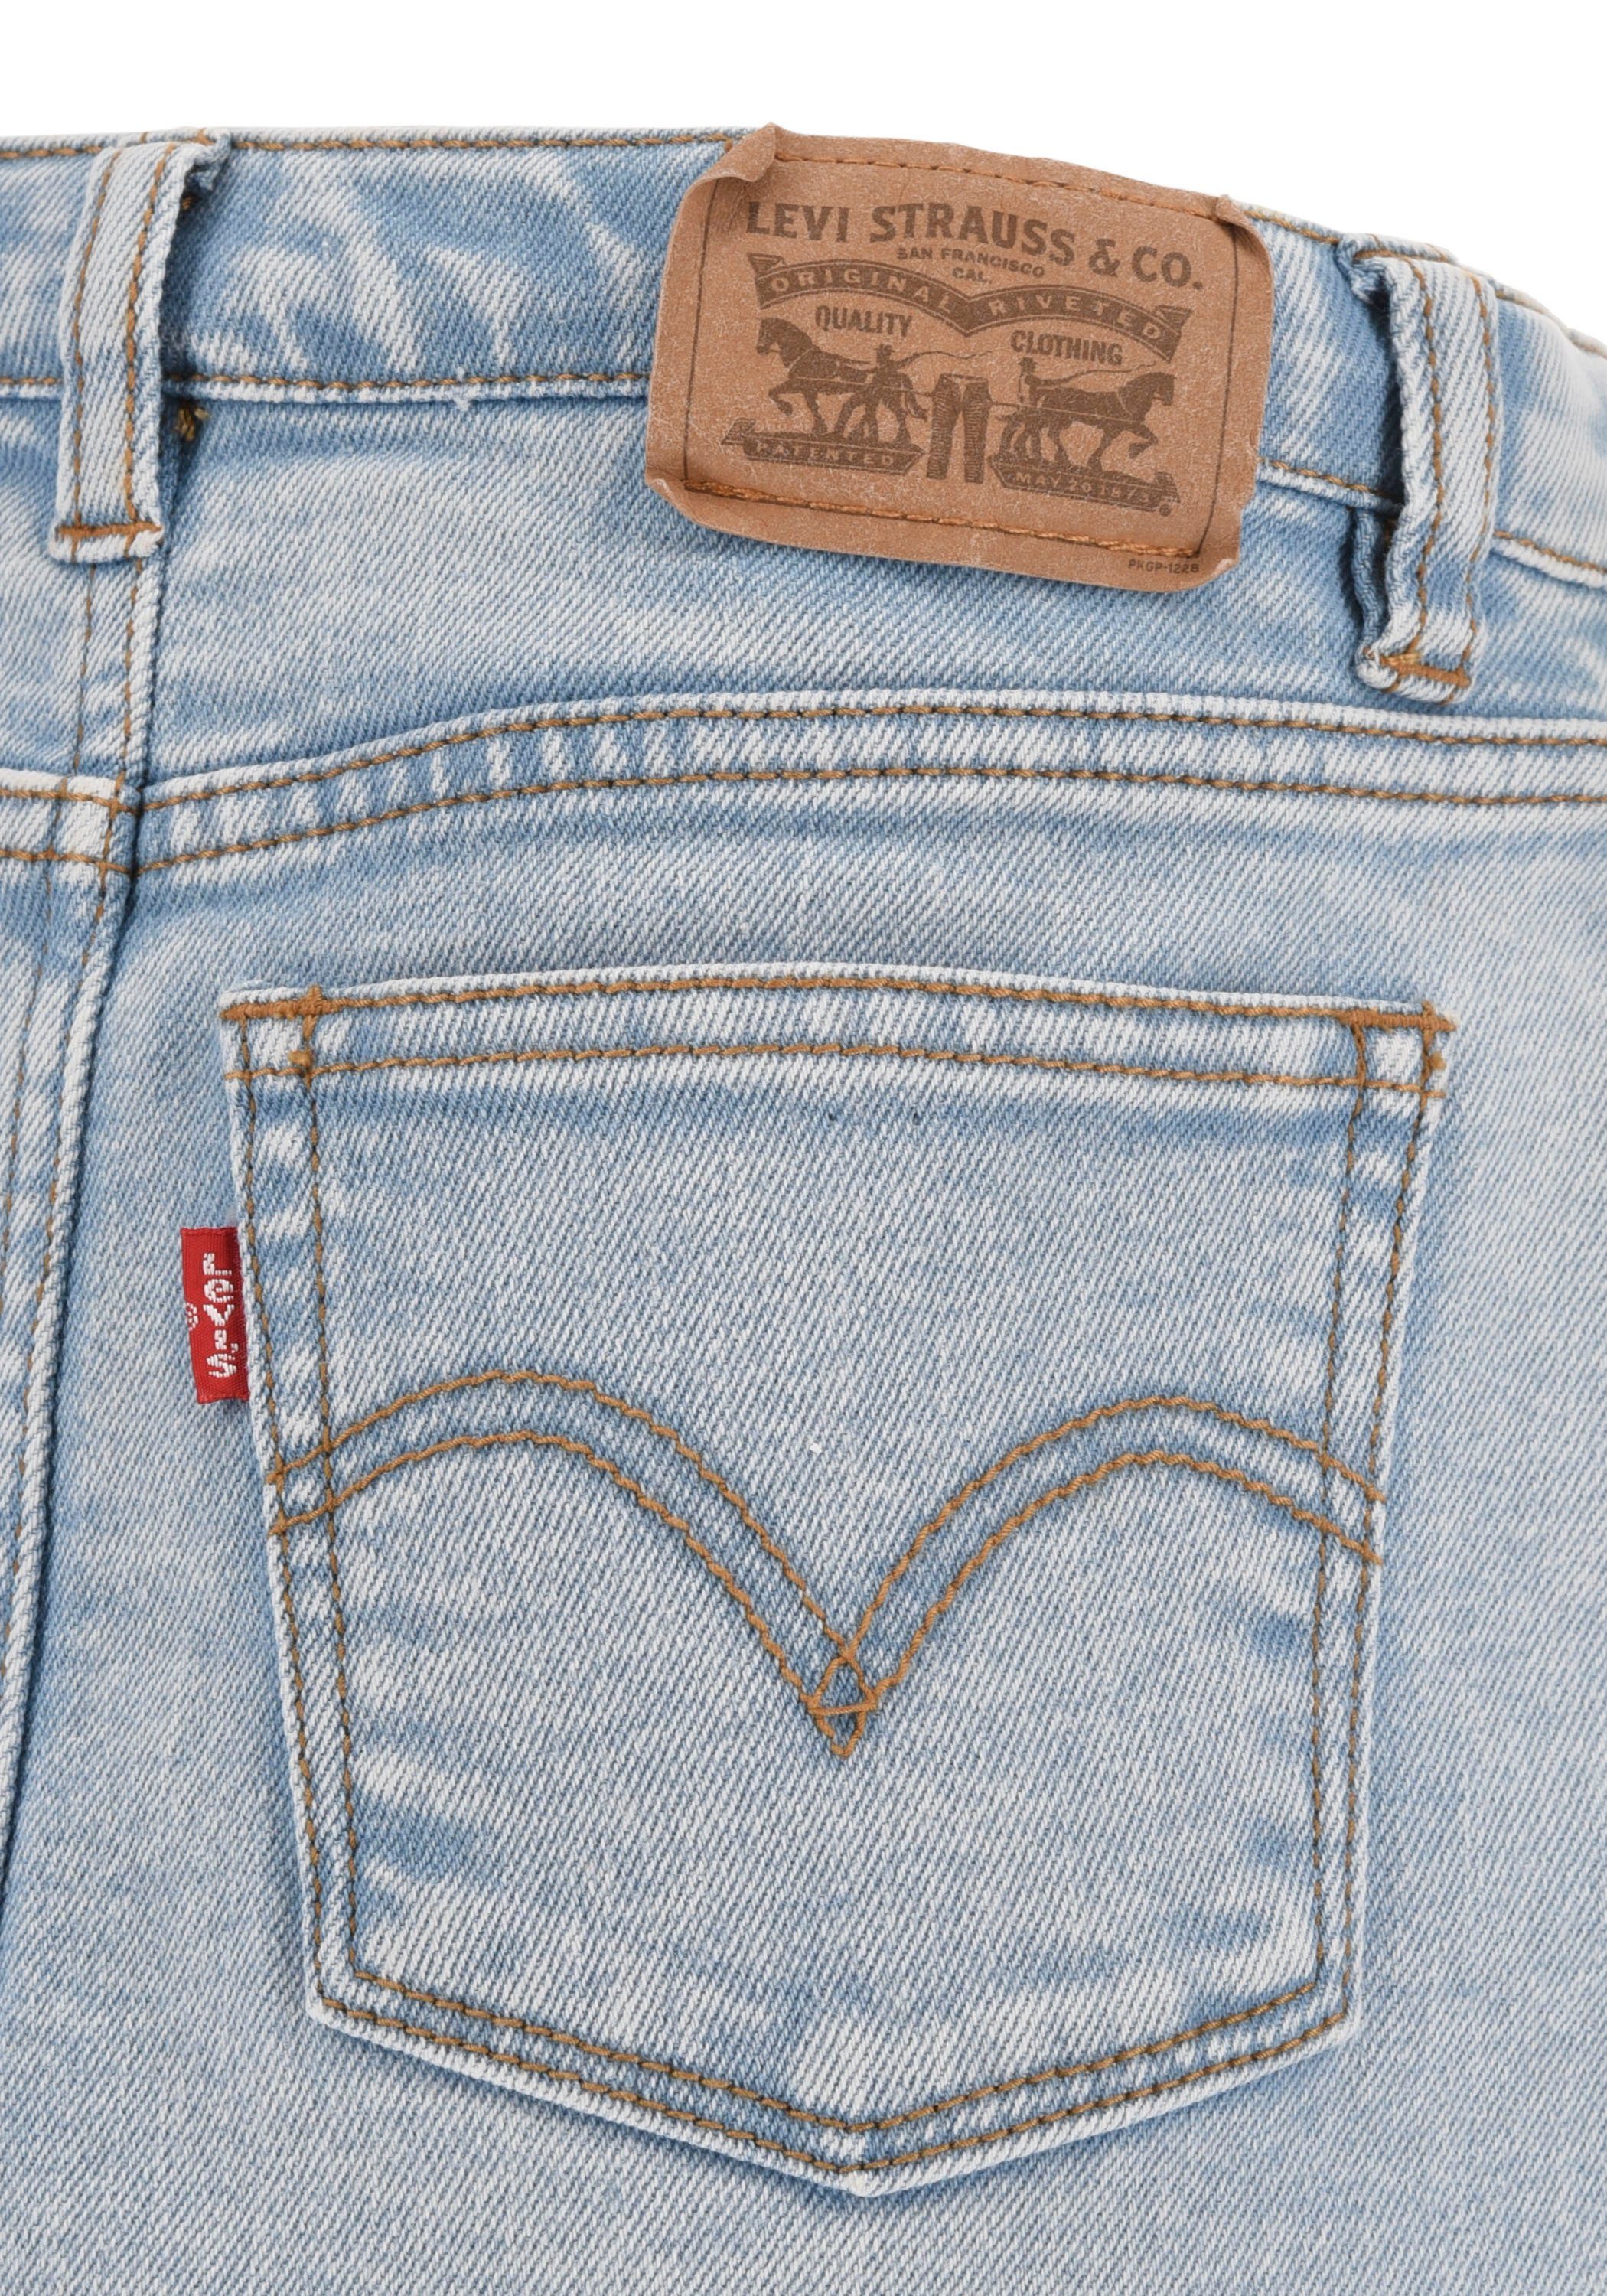 LVG Jeansrock GIRLS RISE and HIGH out for Levi's® SKIRT Kids DENIM down